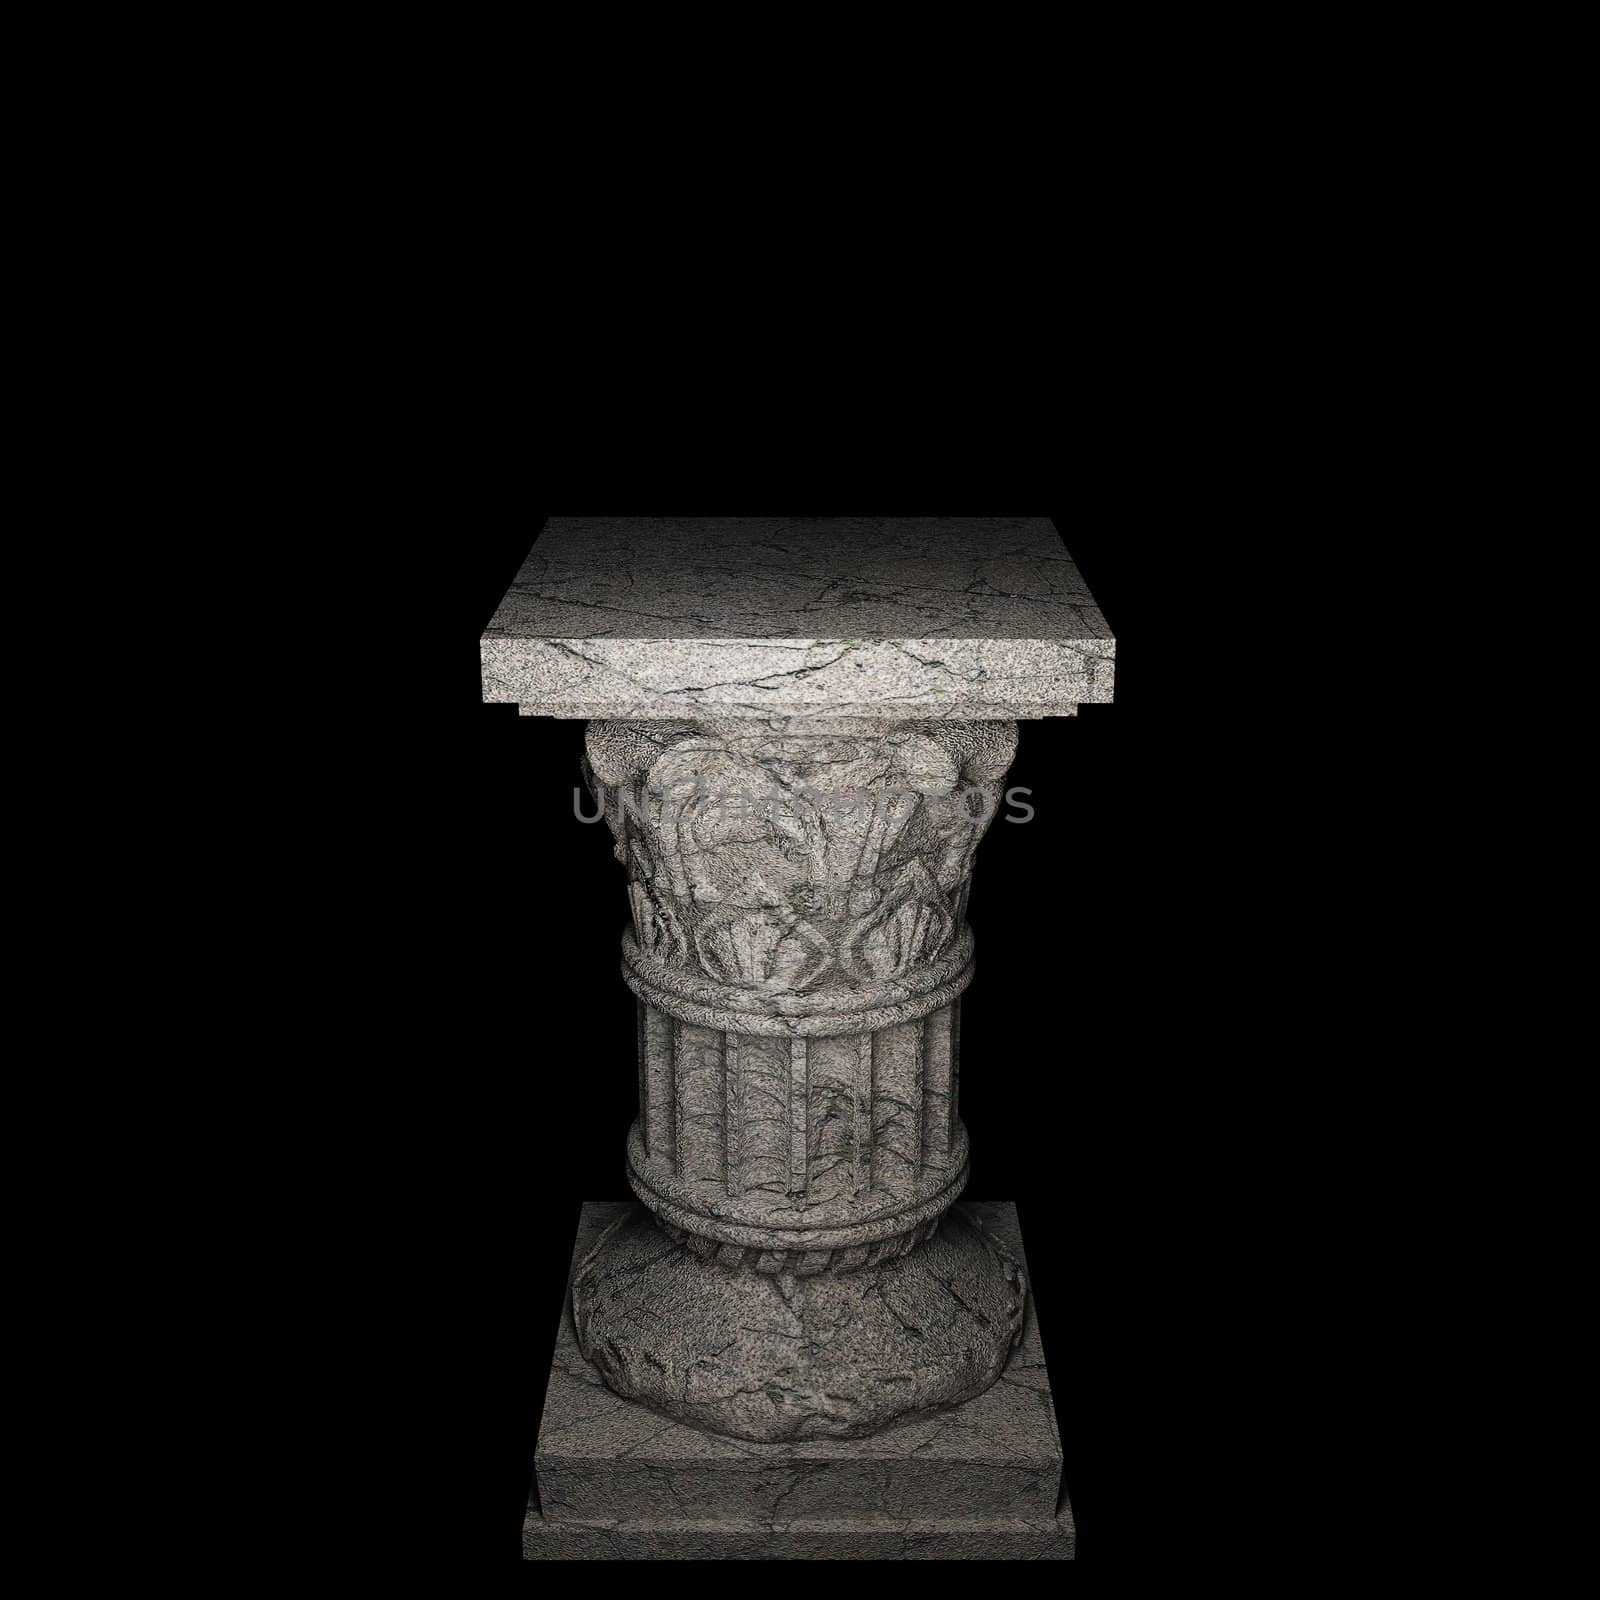 stone column made in 3 D graphics